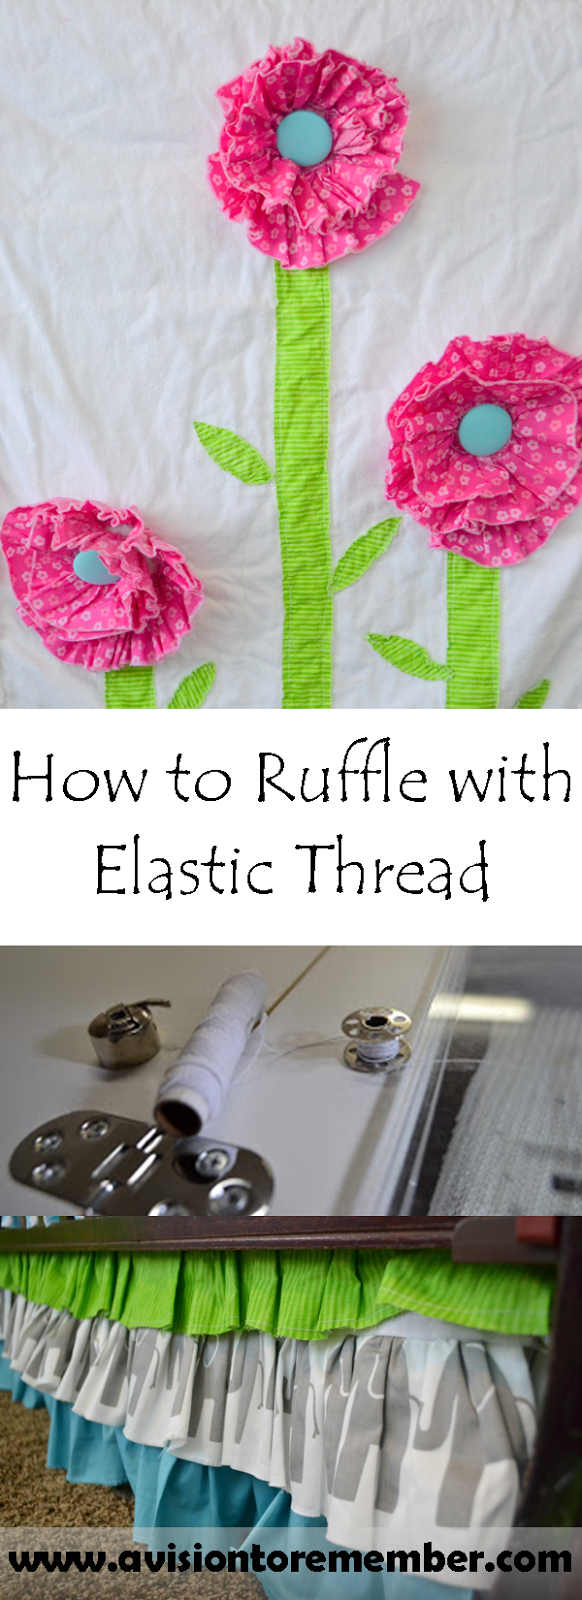 A Vision to Remember All Things Handmade Blog: Easiest Ruffling EVER with  Elastic Thread